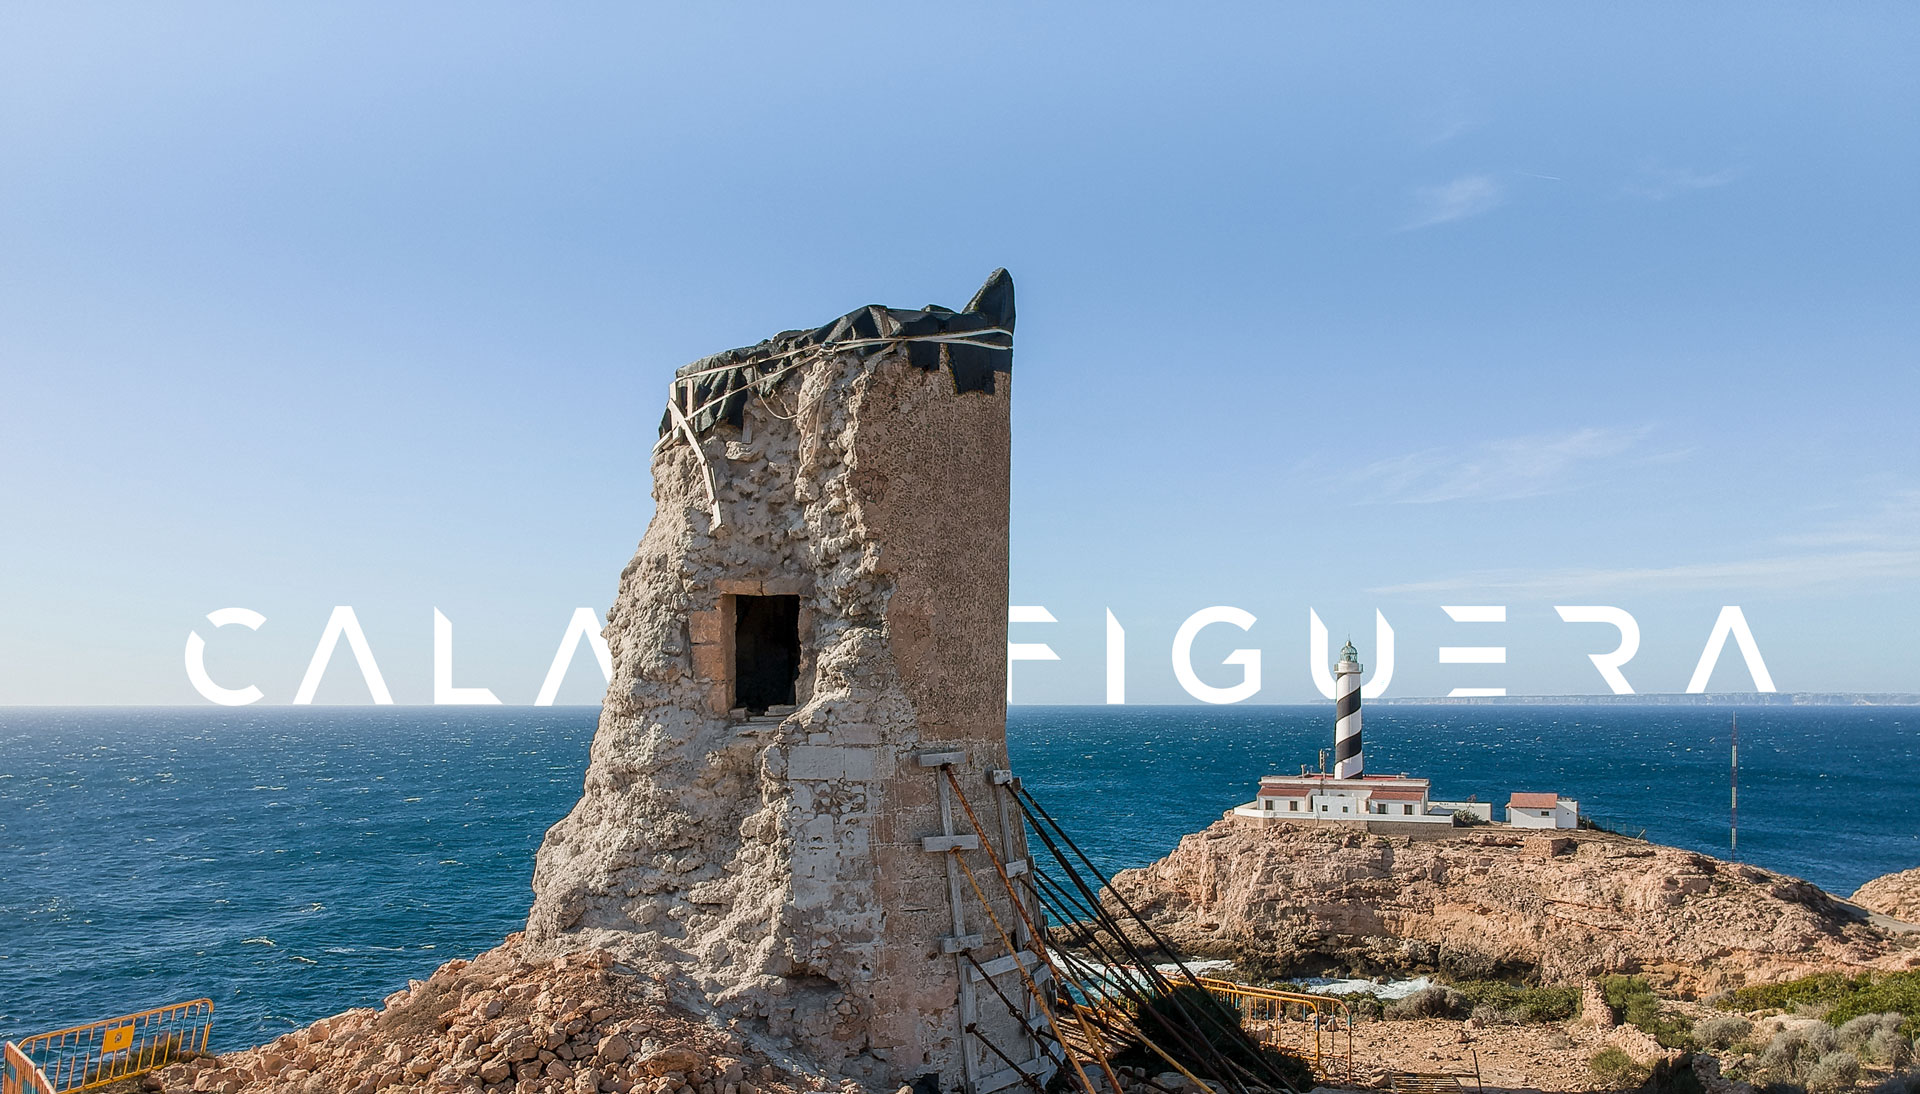 Cala Figuera torre with lighthouse